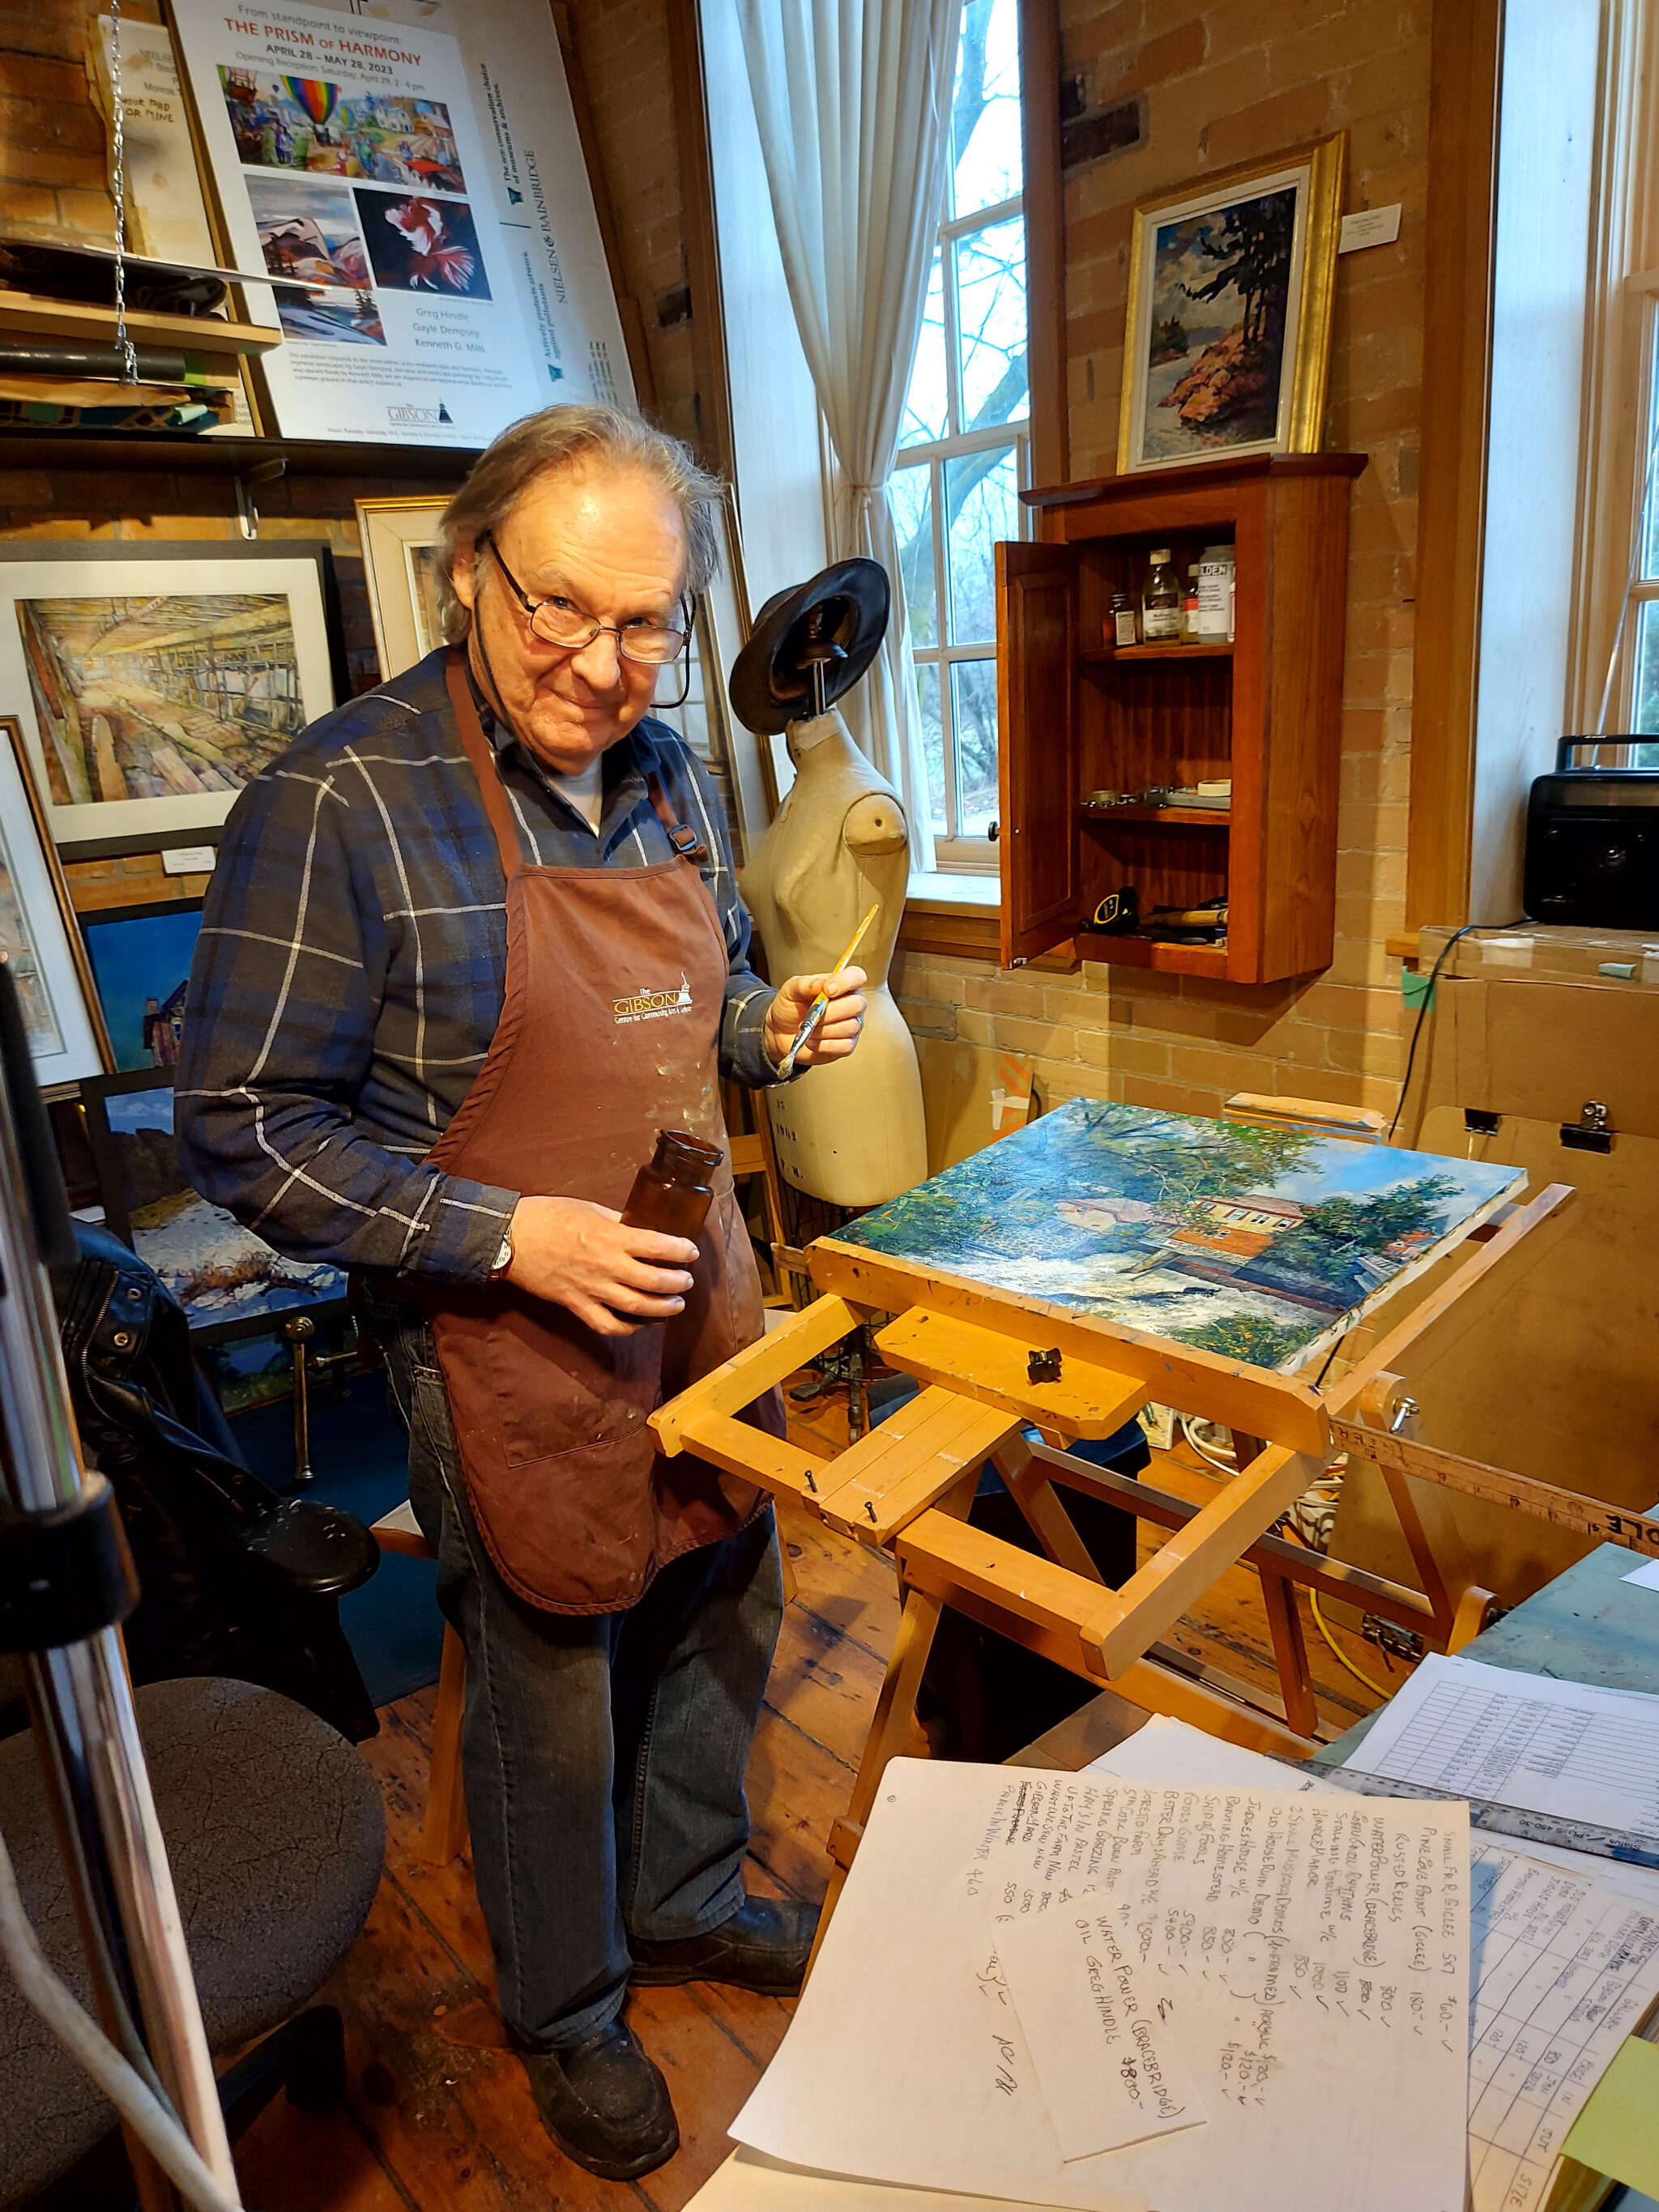 Artist in Residence - Greg Hindle